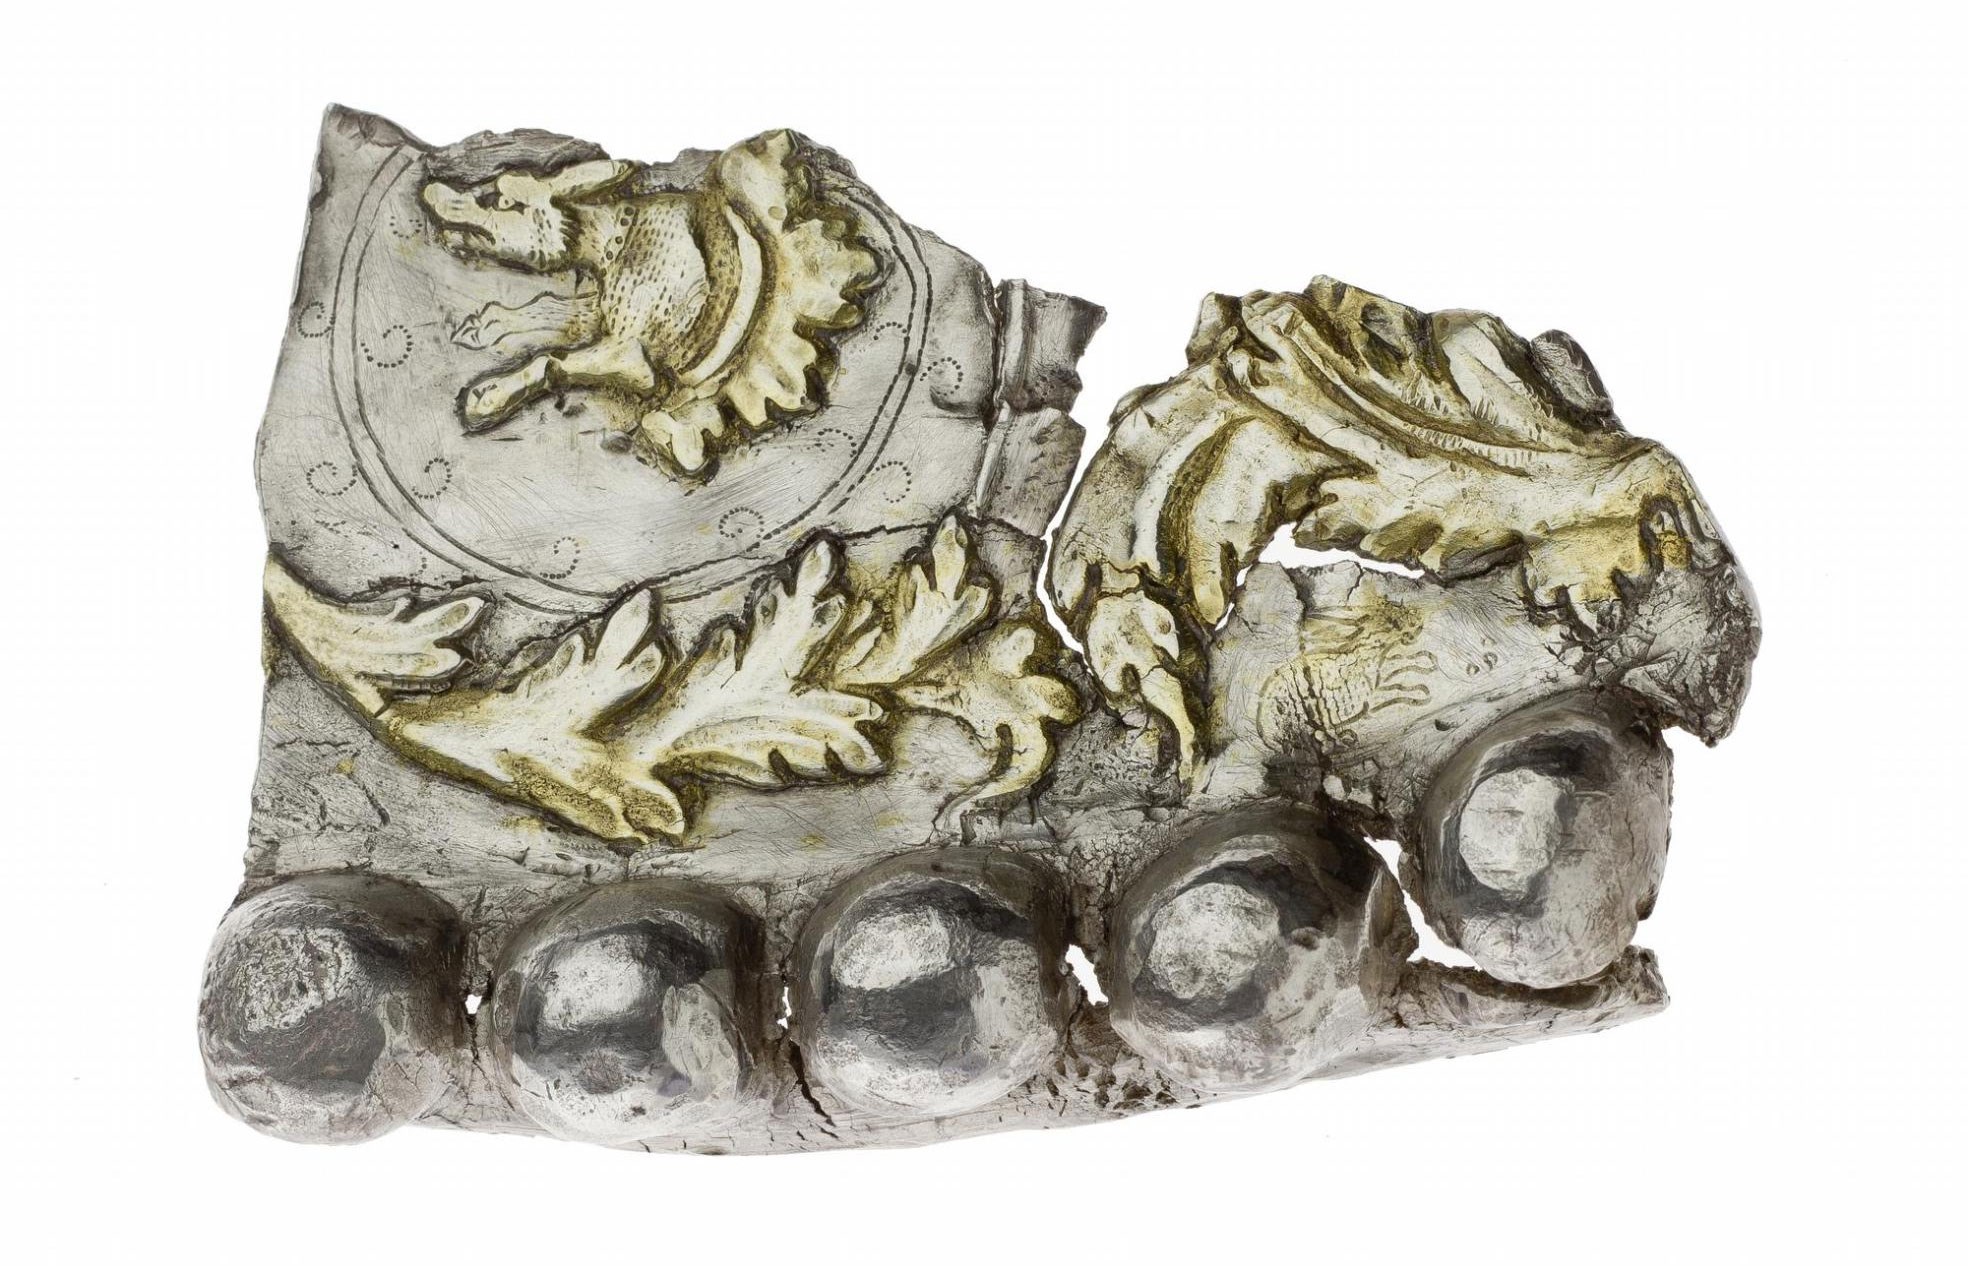 Silver fragment with jagged top edges and bulbous parts at the bottom with decorative gold leaves.